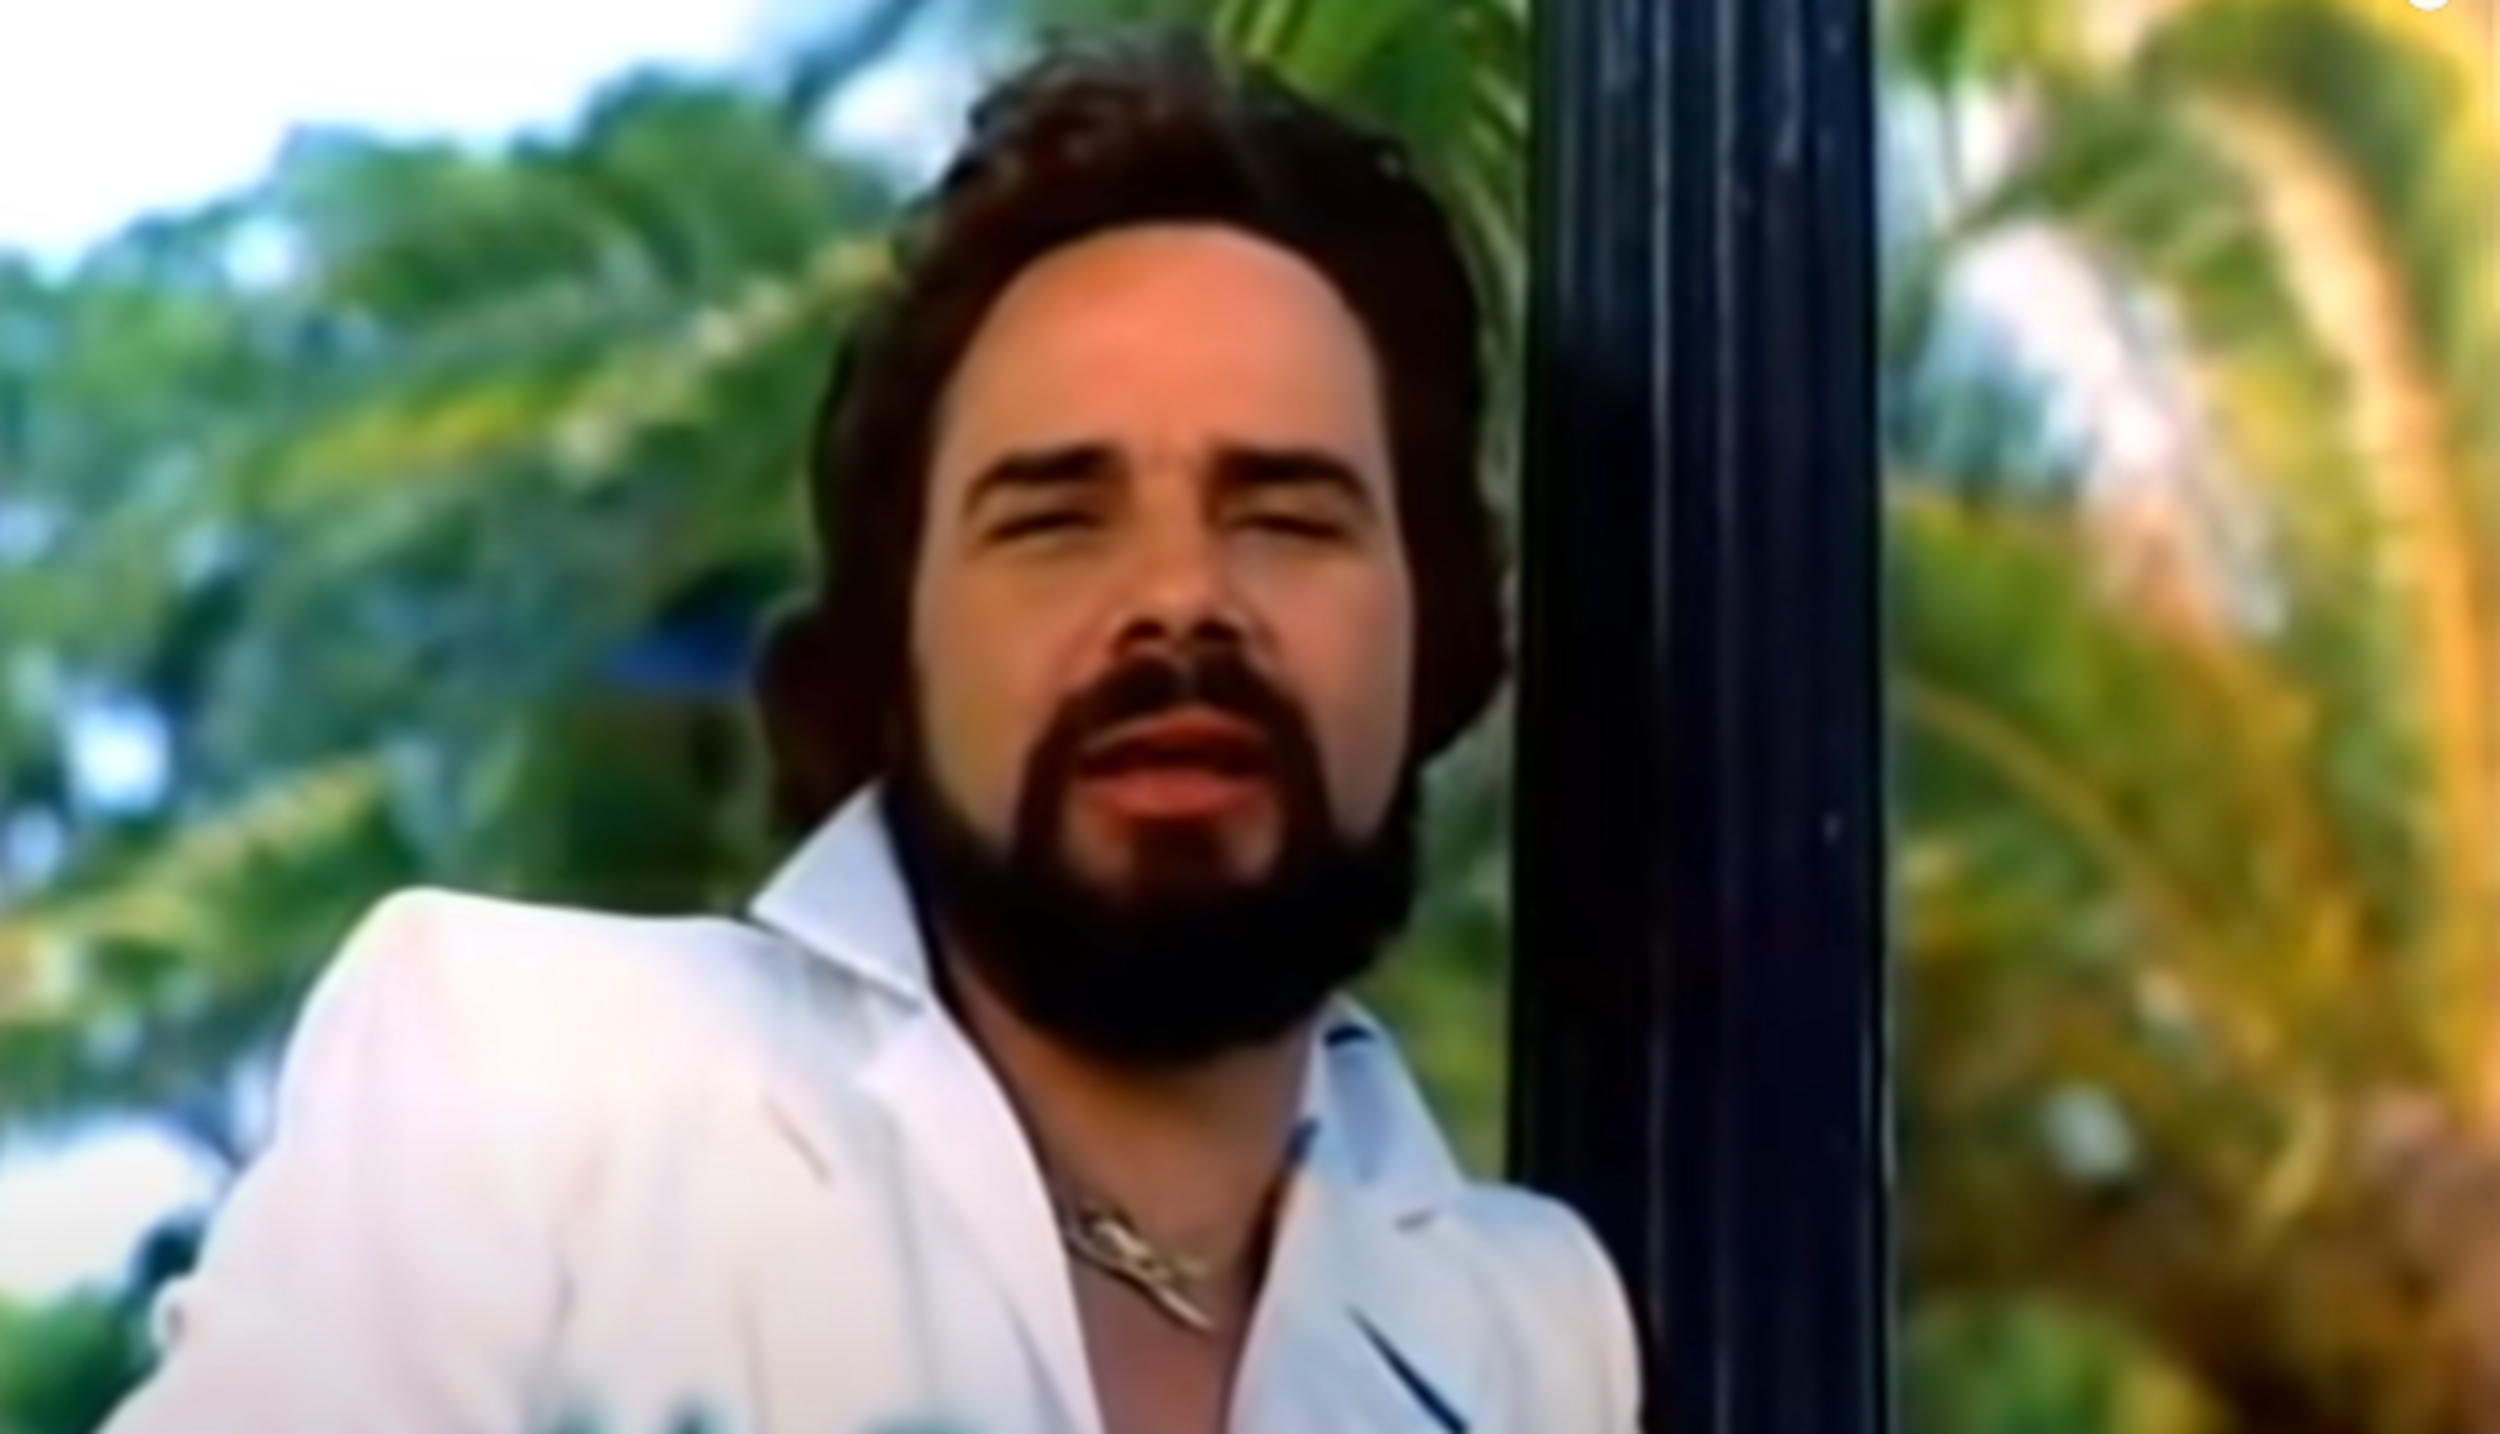 <p>Yacht rock and one-hit wonders seem to go hand-in-hand. Higgins scored one in the early 1980s with this number that reached No. 8 on the <em>Billboard</em> Hot 100. The Florida native was inspired to write this <a href="https://www.youtube.com/watch?v=Ru2tsT32pHA">song about trying to avoid a romantic breakup</a> by the 1948 movie of the same name, starring Humphrey Bogart and Lauren Bacall, who are referenced in the tune. Though Higgins never enjoyed the same individual success as a musician, the song has had a solid shelf life and remains a definitive moment in the yacht rock genre.</p><p>You may also like: <a href='https://www.yardbarker.com/entertainment/articles/25_films_where_actors_brilliantly_played_against_type_022424/s1__24515020'>25 films where actors brilliantly played against type</a></p>